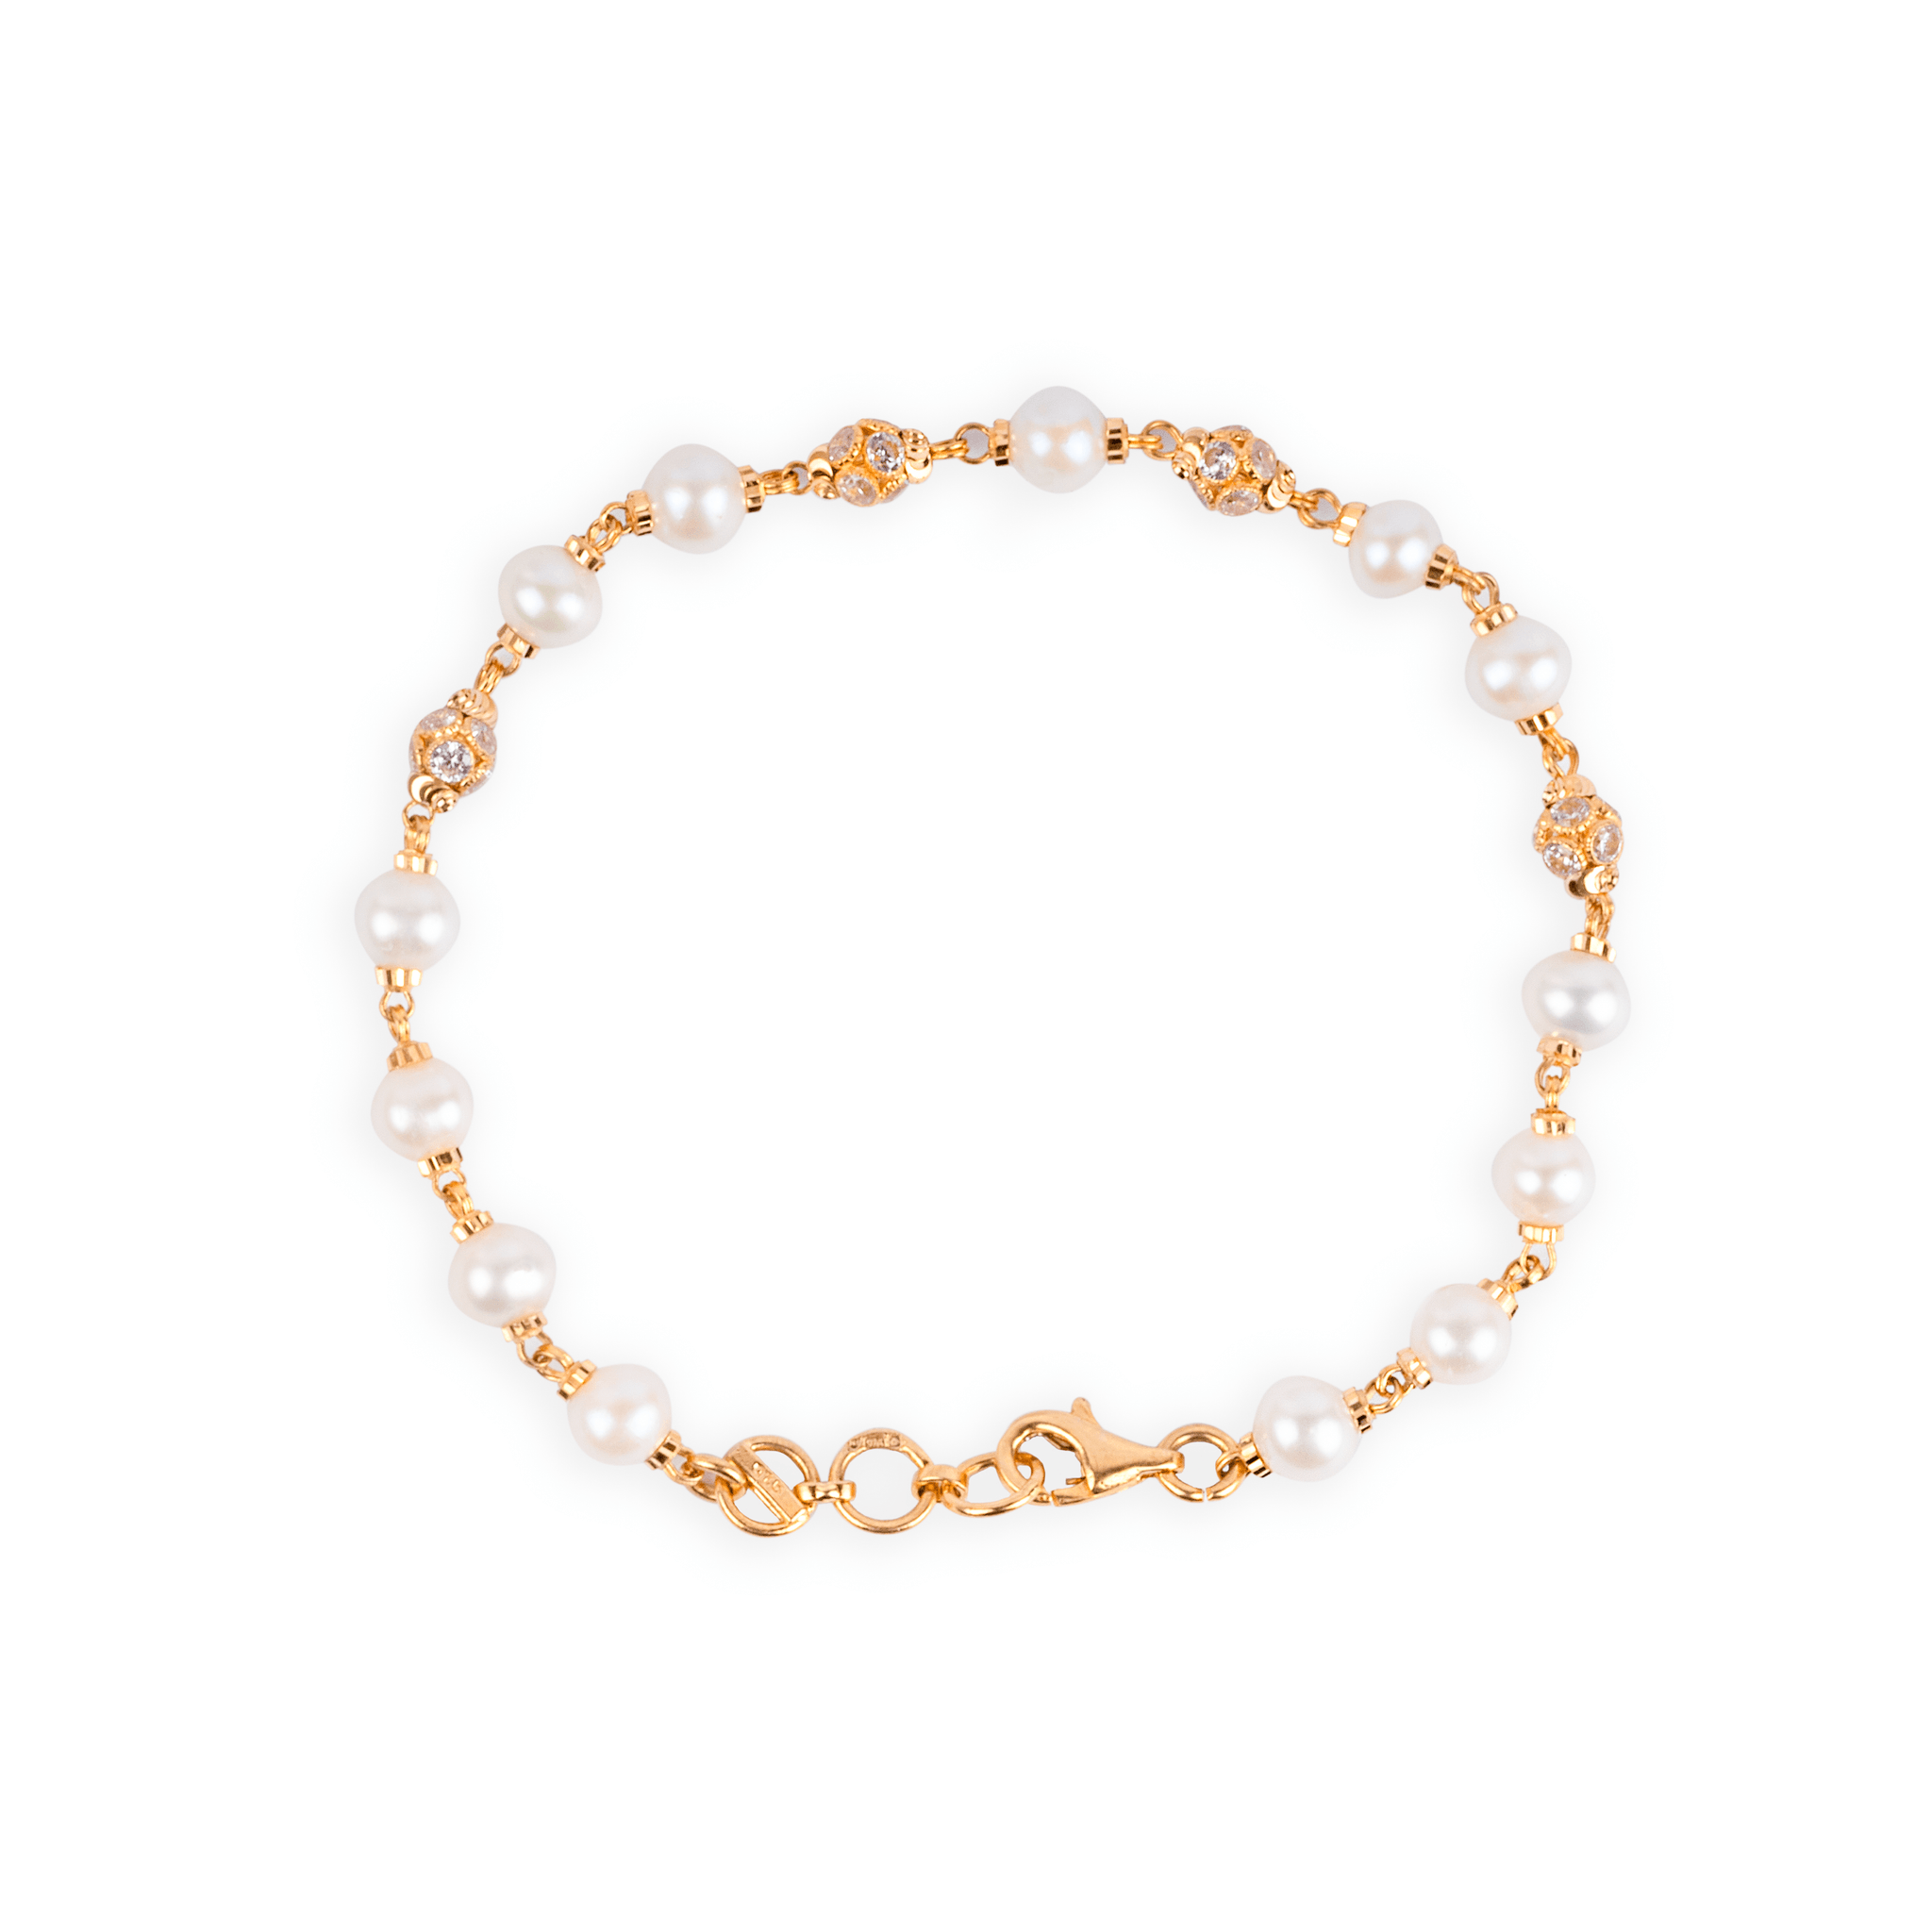 22ct Gold Adjustable Bracelet with Cultured Pearls & Cubic Zirconia Beads with Lobster Clasp (6.2g) LBR-7135